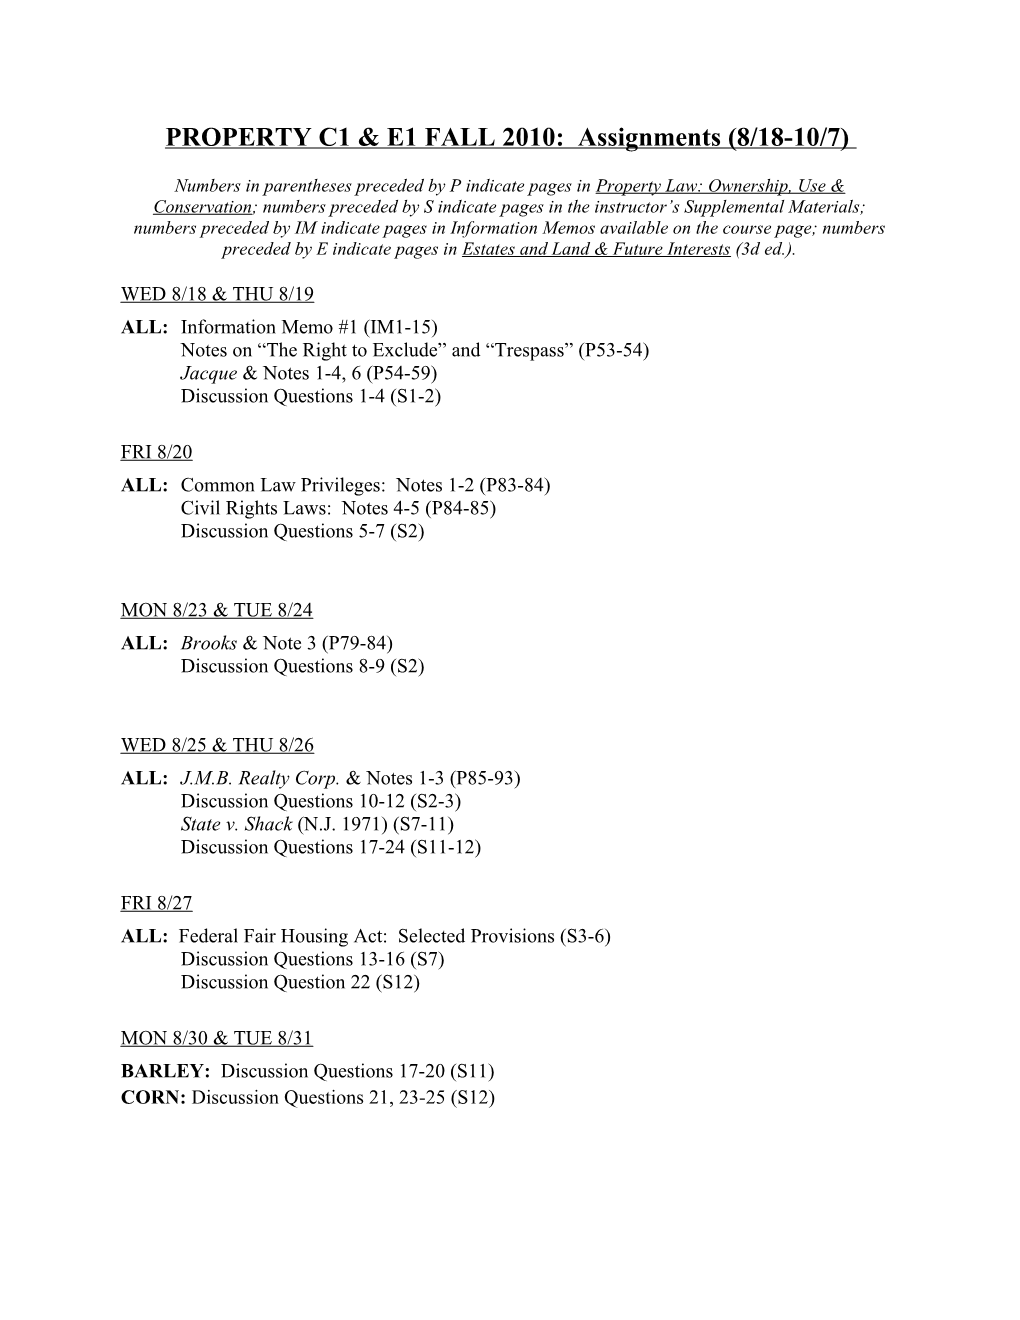 PROPERTY C1 & E1FALL 2010: Assignments (8/18-10/7)